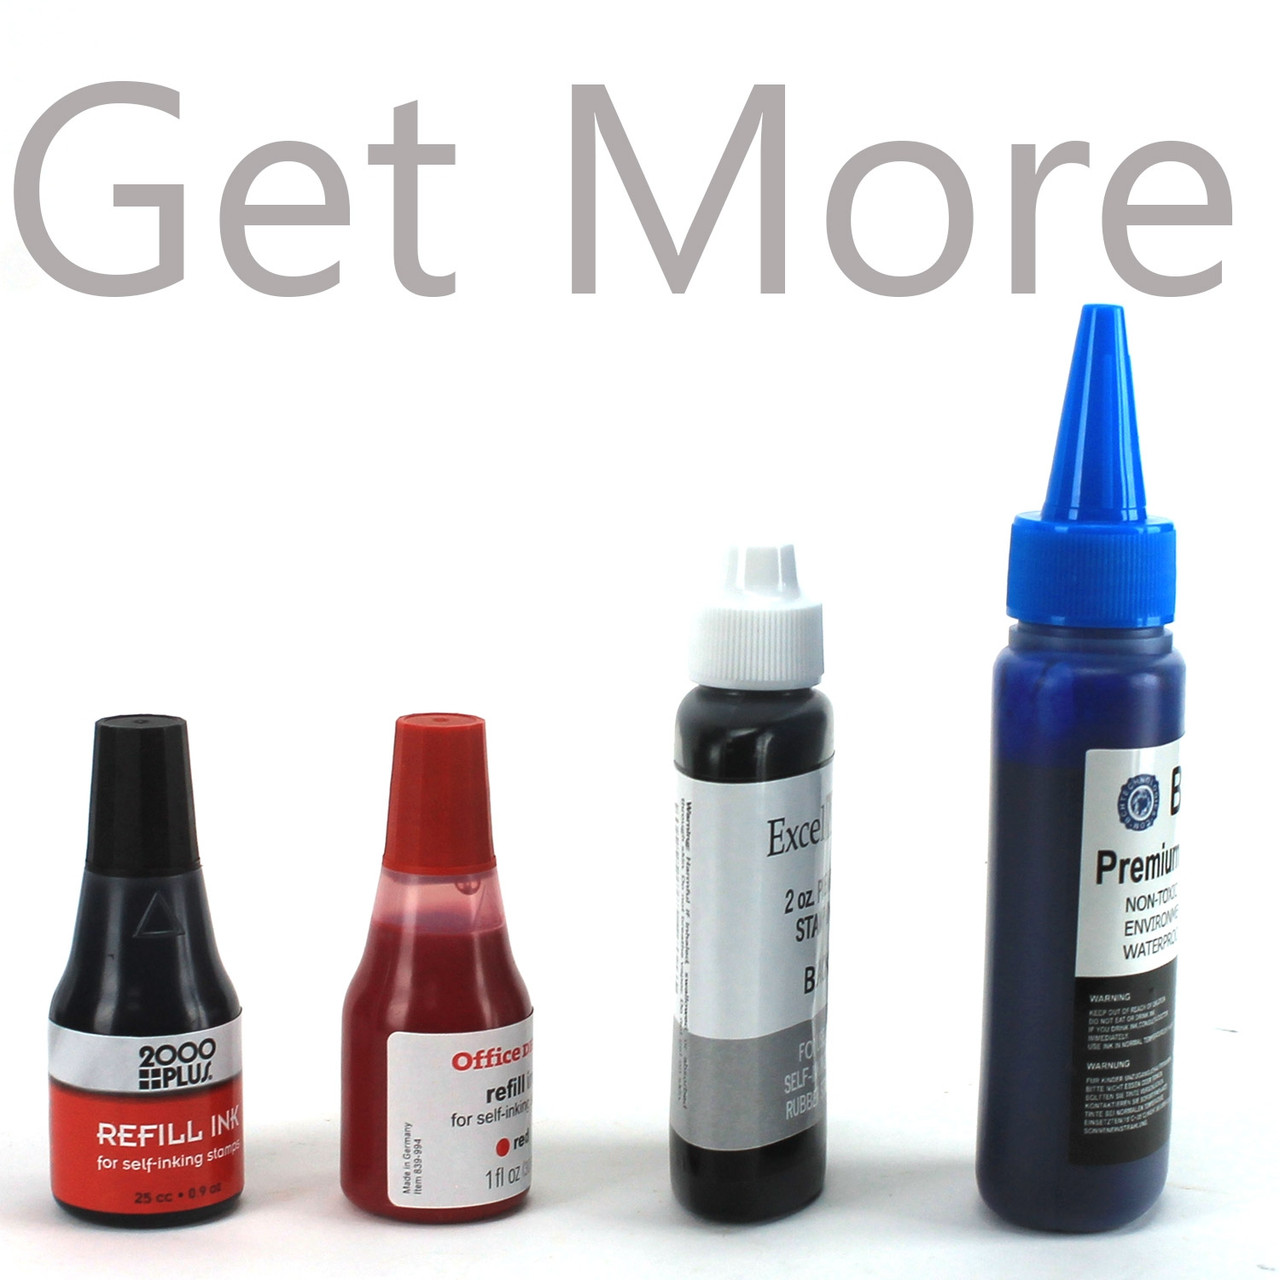 ExcelMark Self-Inking Ink - 5 cc